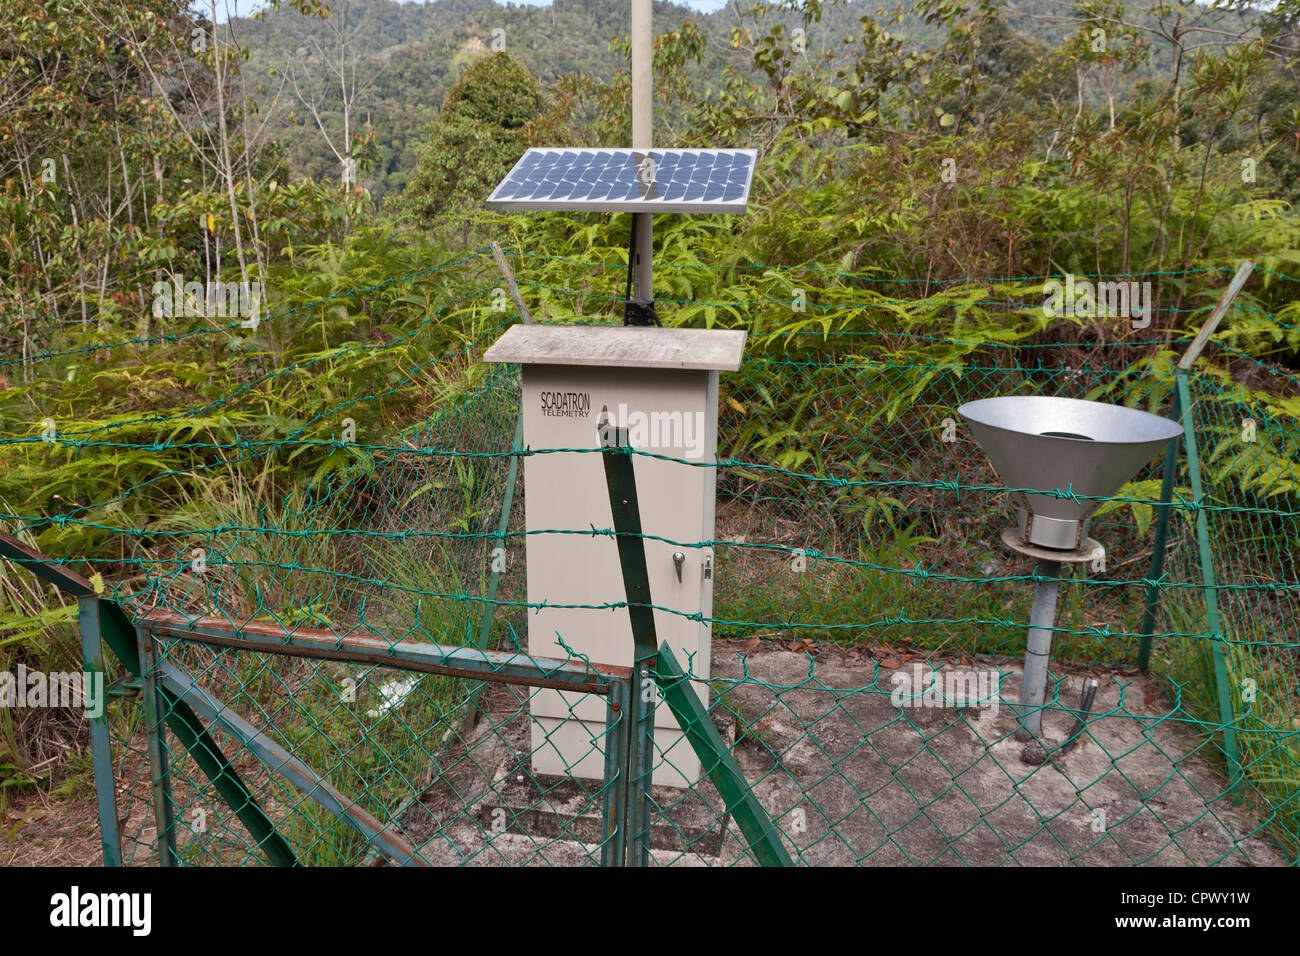 Solar powered hilltop telemetry station, rain gauge, weather station, Genting Highlands, Malaysia Stock Photo